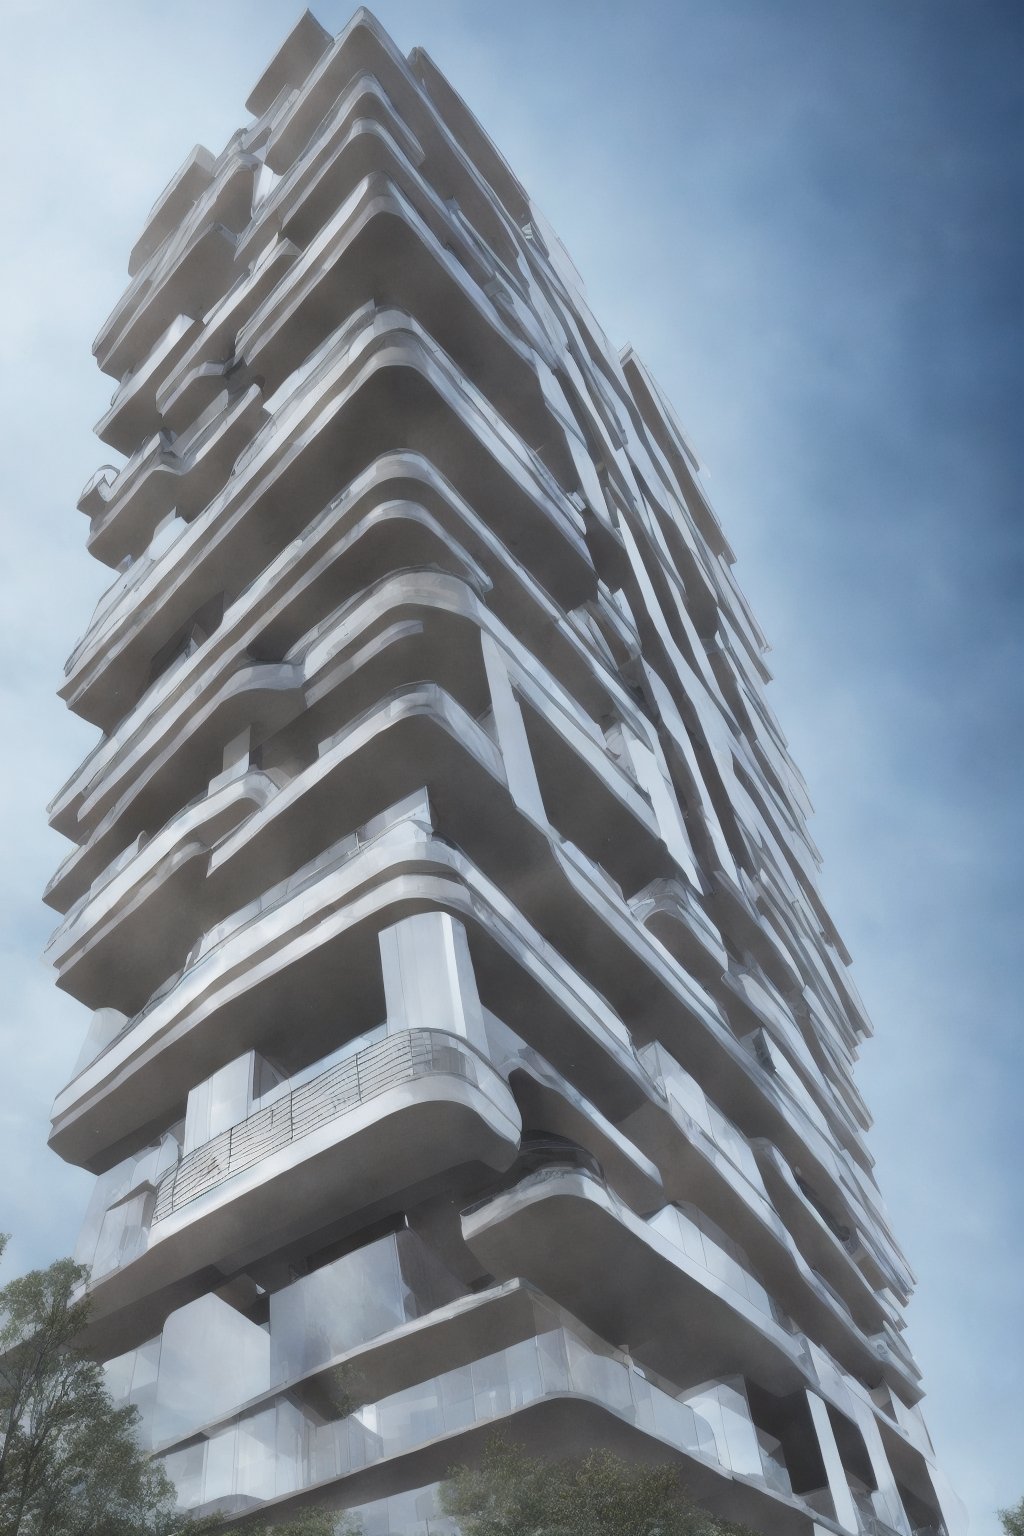 cylinder-shaped building with large balconies, looking like a hyper-realistic photograph